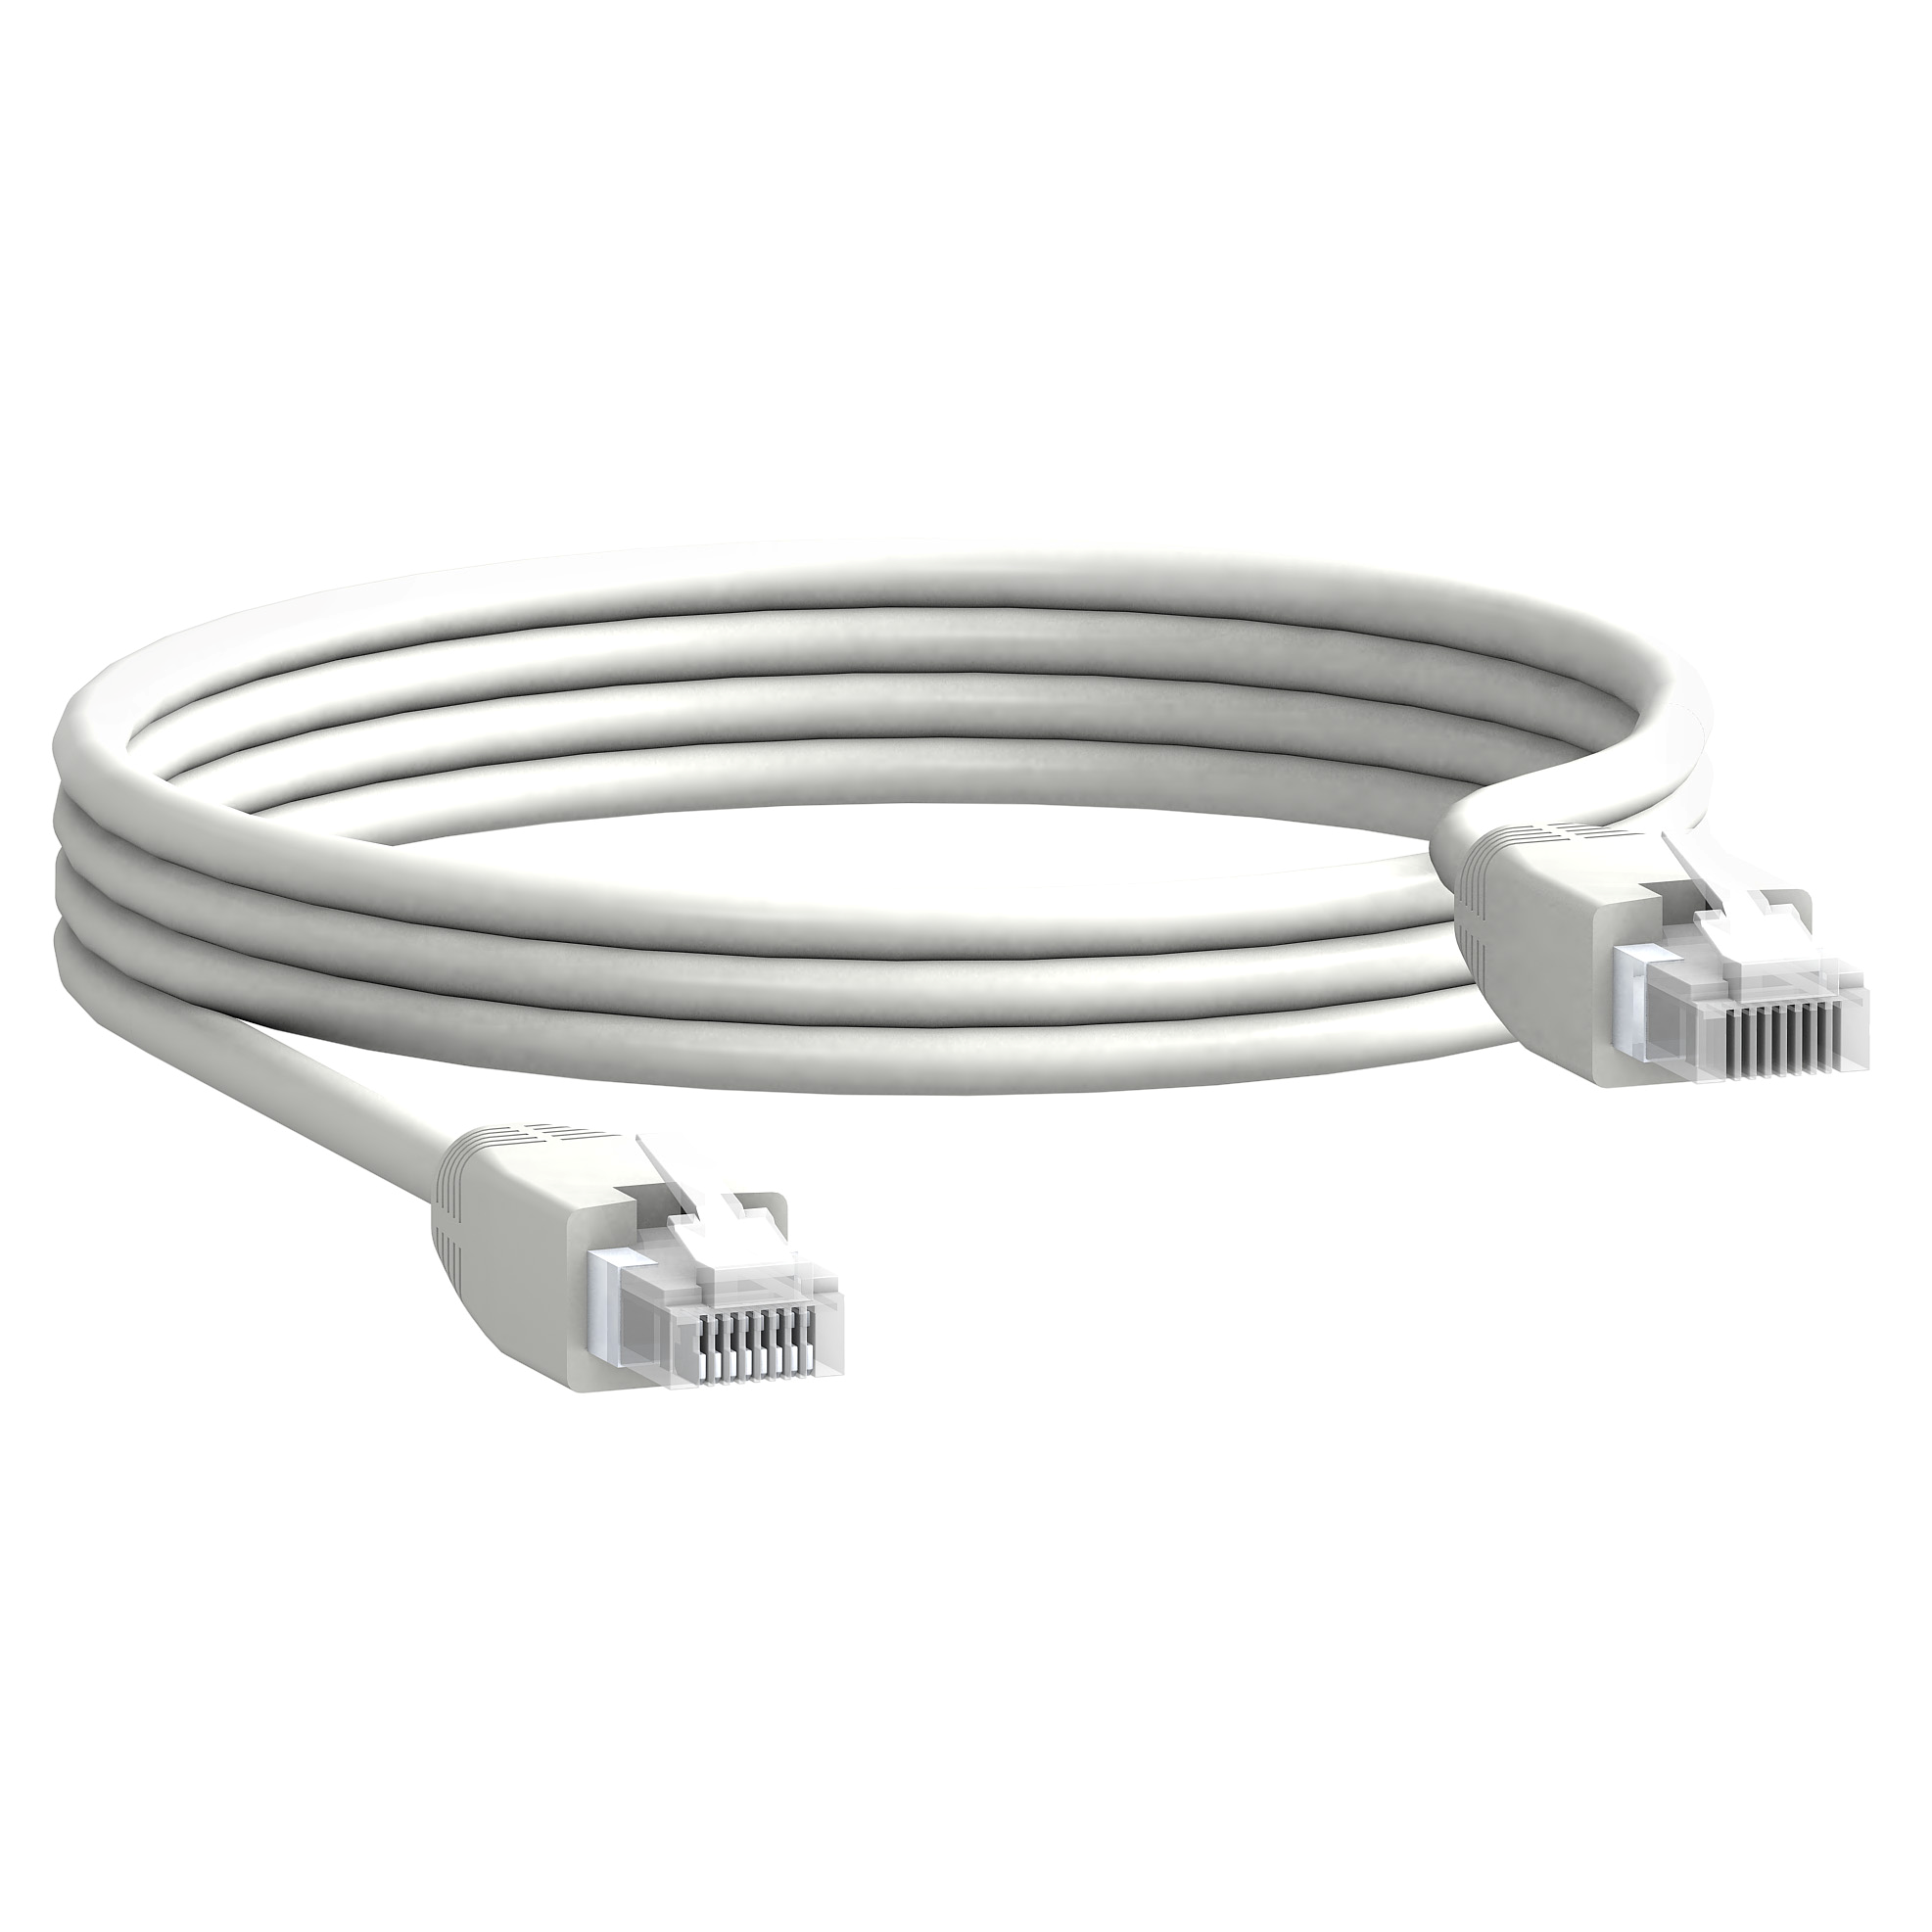 Schneider Electric Ethernet Cable, RJ45 to RJ45, 3m